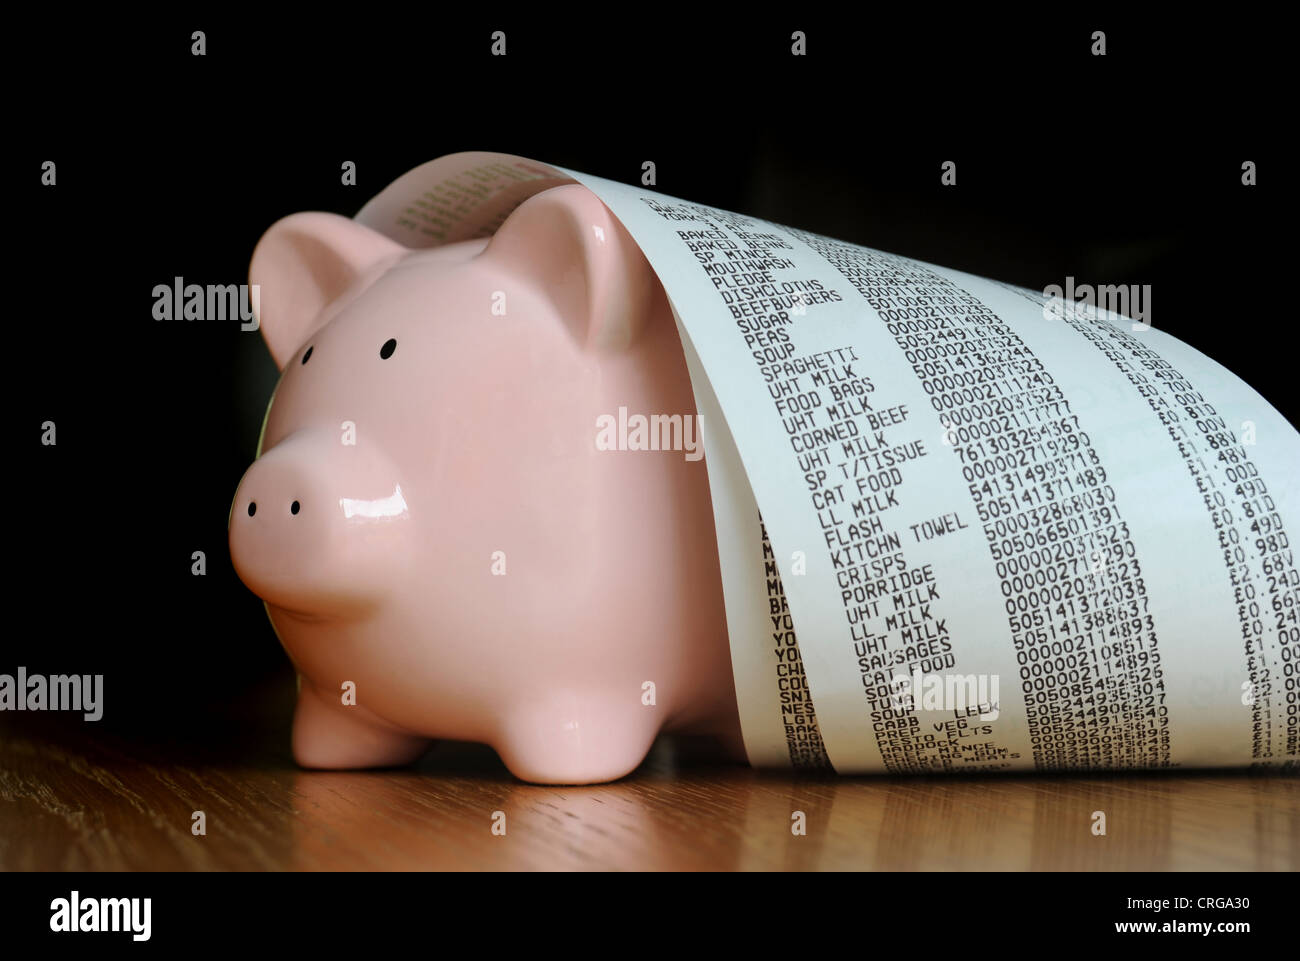 PIGGYBANK WITH SUPERMARKET TILL RECEIPTS RE SHOPPING FOOD BILLS COSTS INCOMES HOUSEHOLD BUDGETS WAGES SAVINGS PRICES ECONOMY UK Stock Photo